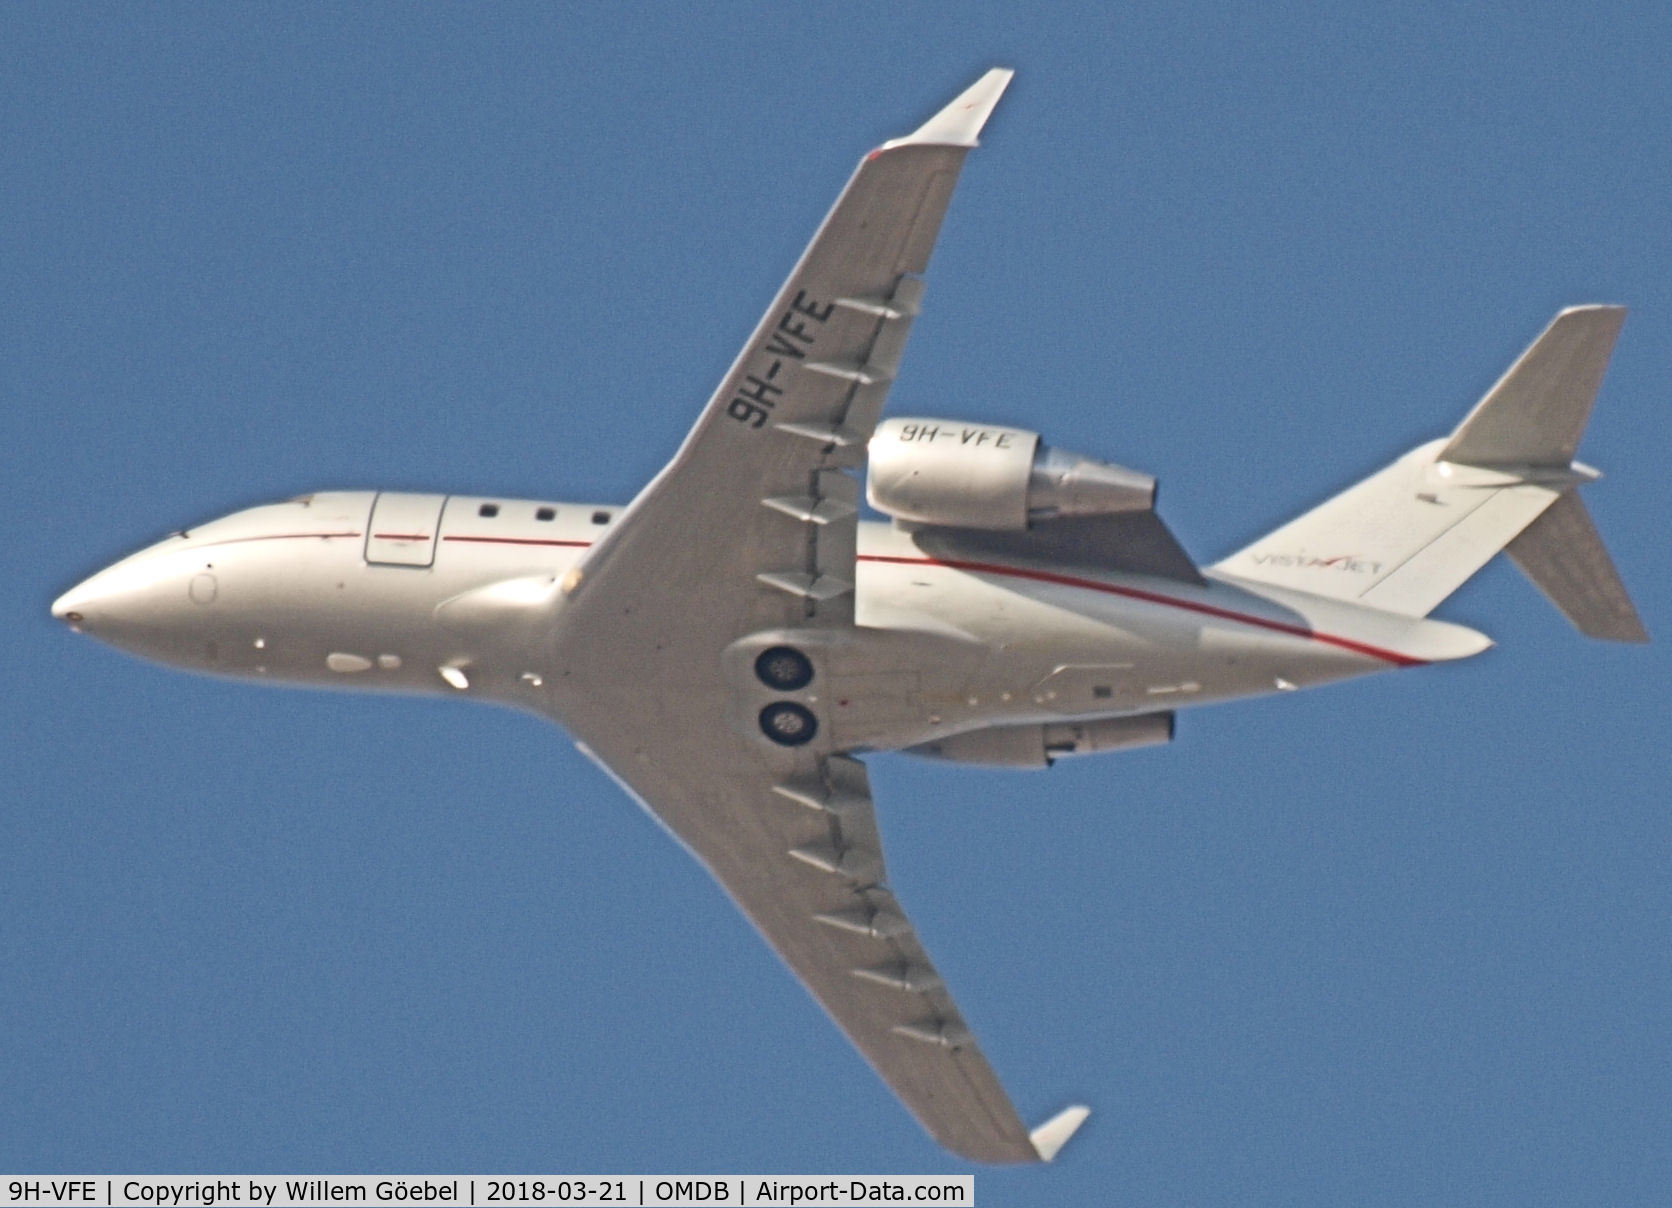 9H-VFE, 2014 Bombardier Challenger 605 (CL-600-2B16) C/N 5974, Take off from DUBAI INTERNATIONAL Airport